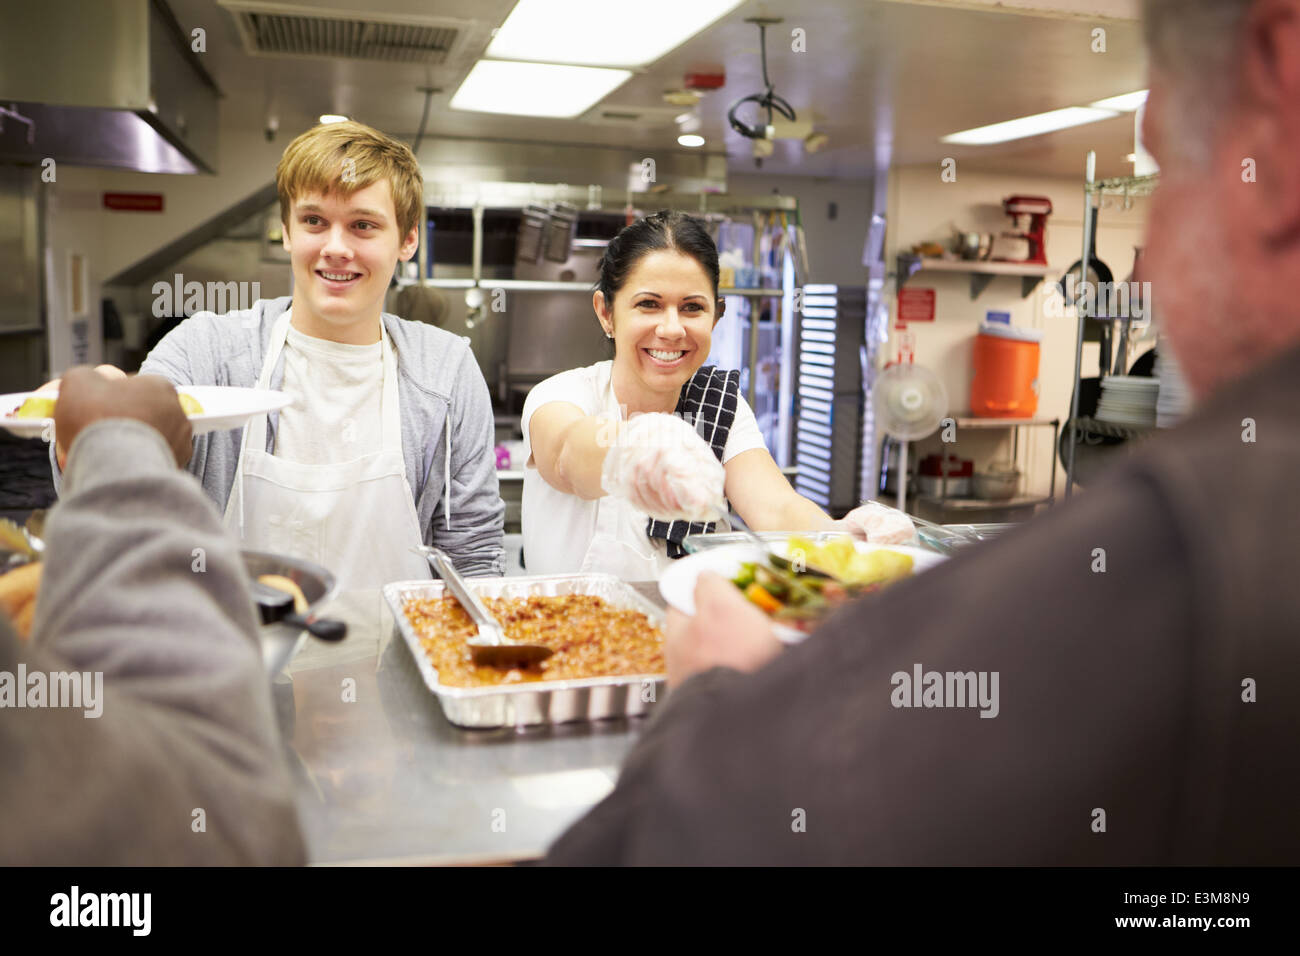 Staff Serving Food In Homeless Shelter Kitchen Stock Photo